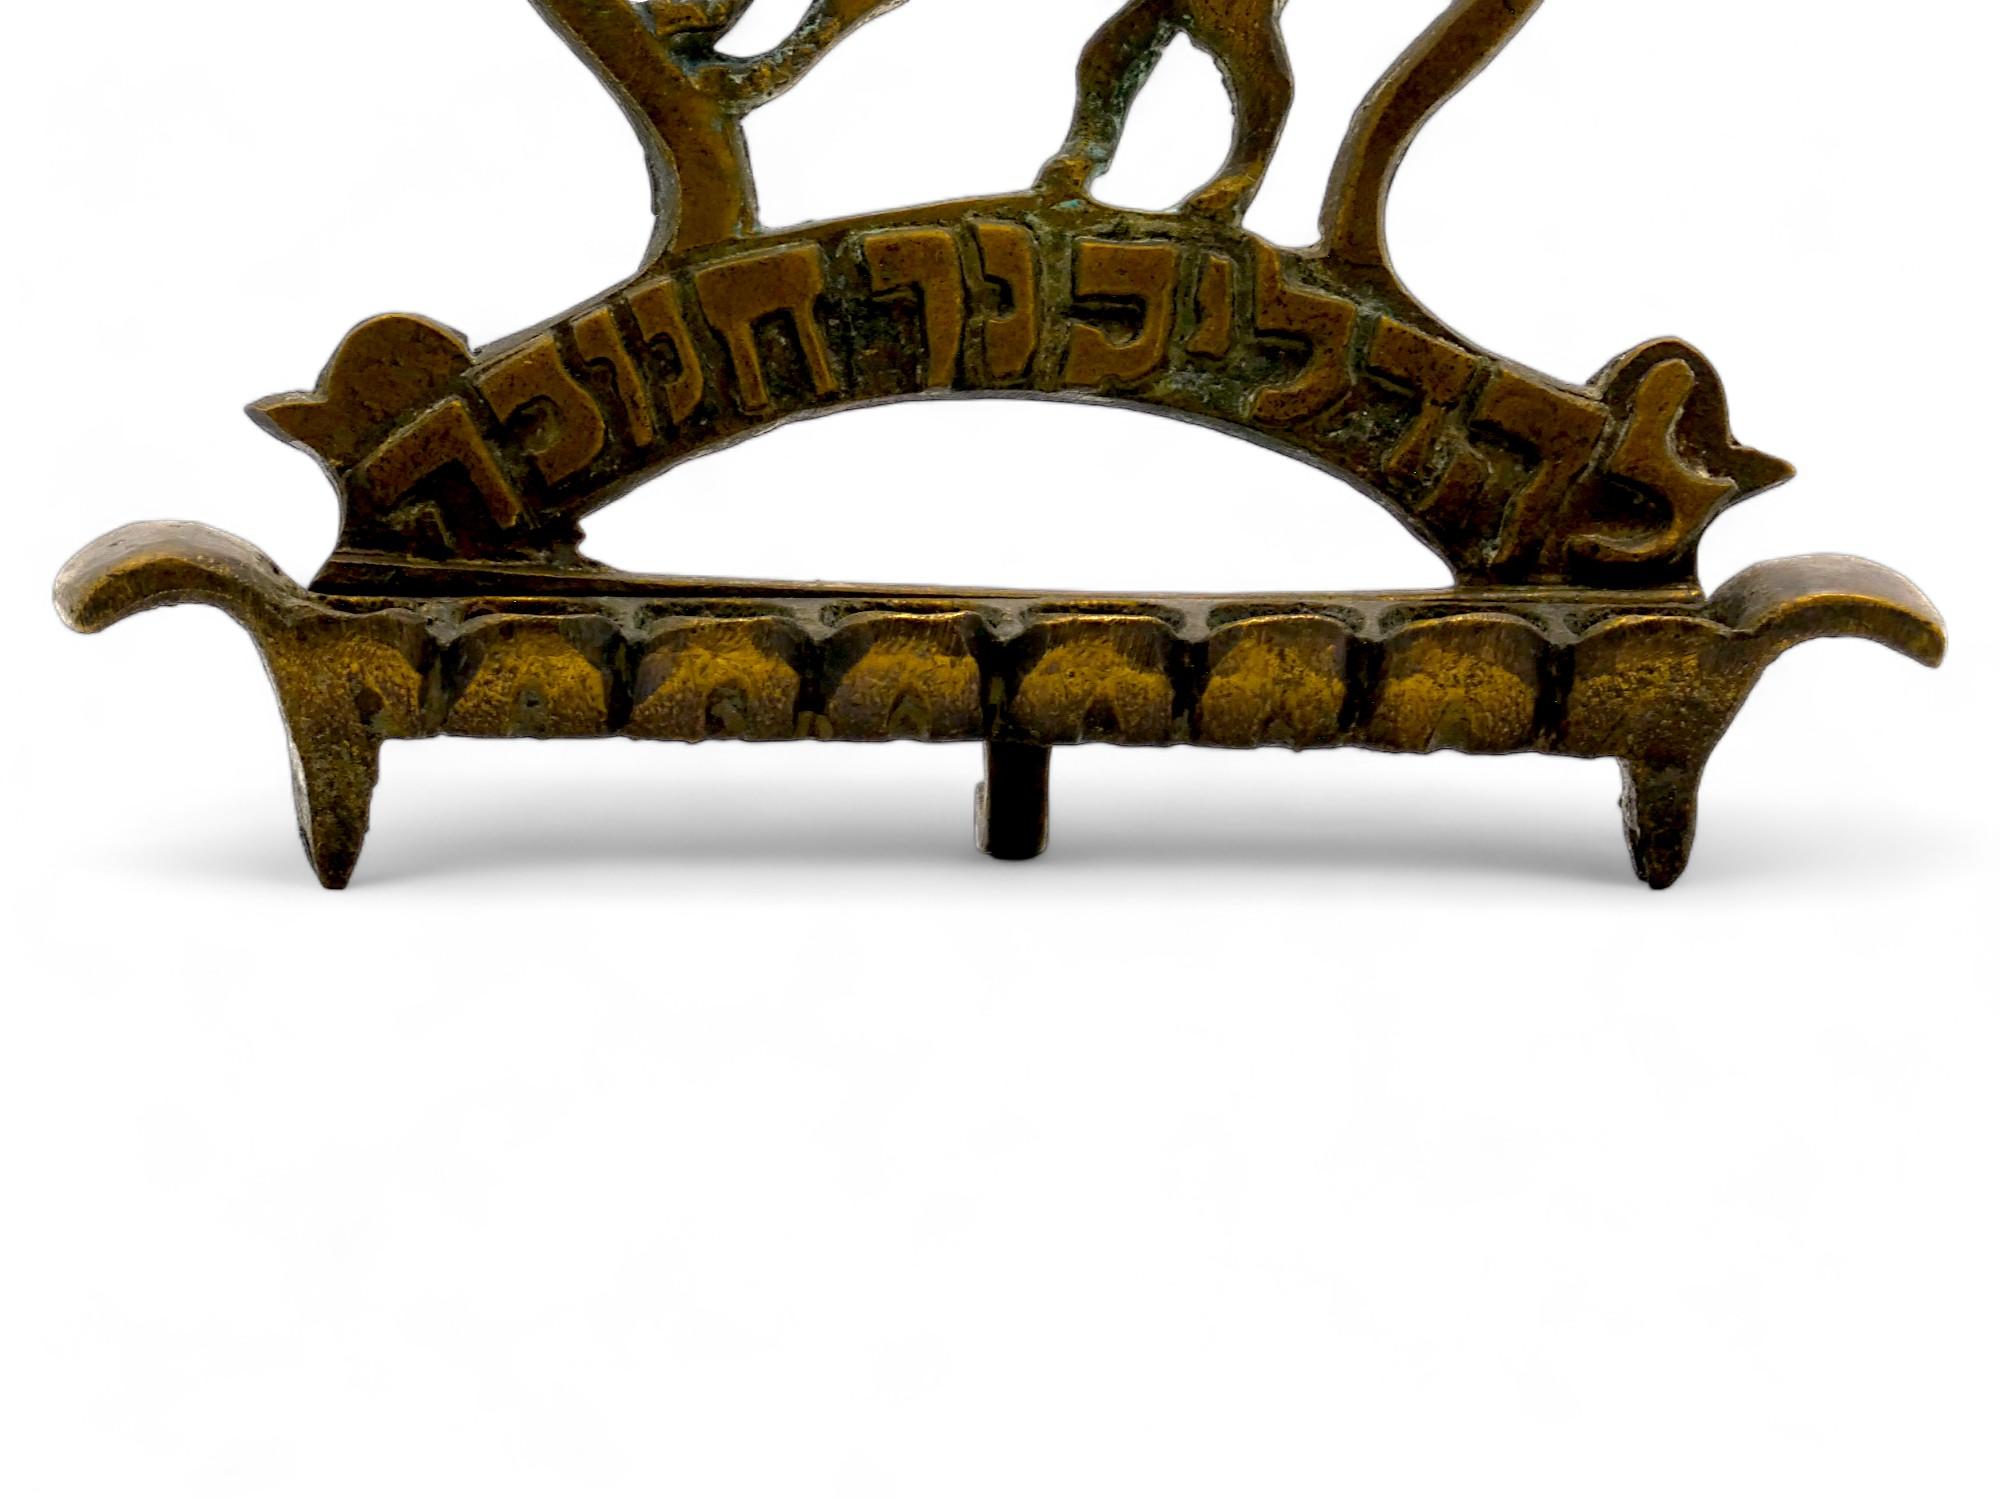 A 19th Century Polish Brass Hanukkah Lamp.

The cast backplate presents a pierced lion leaning on one side of an outlined majestic crown.

